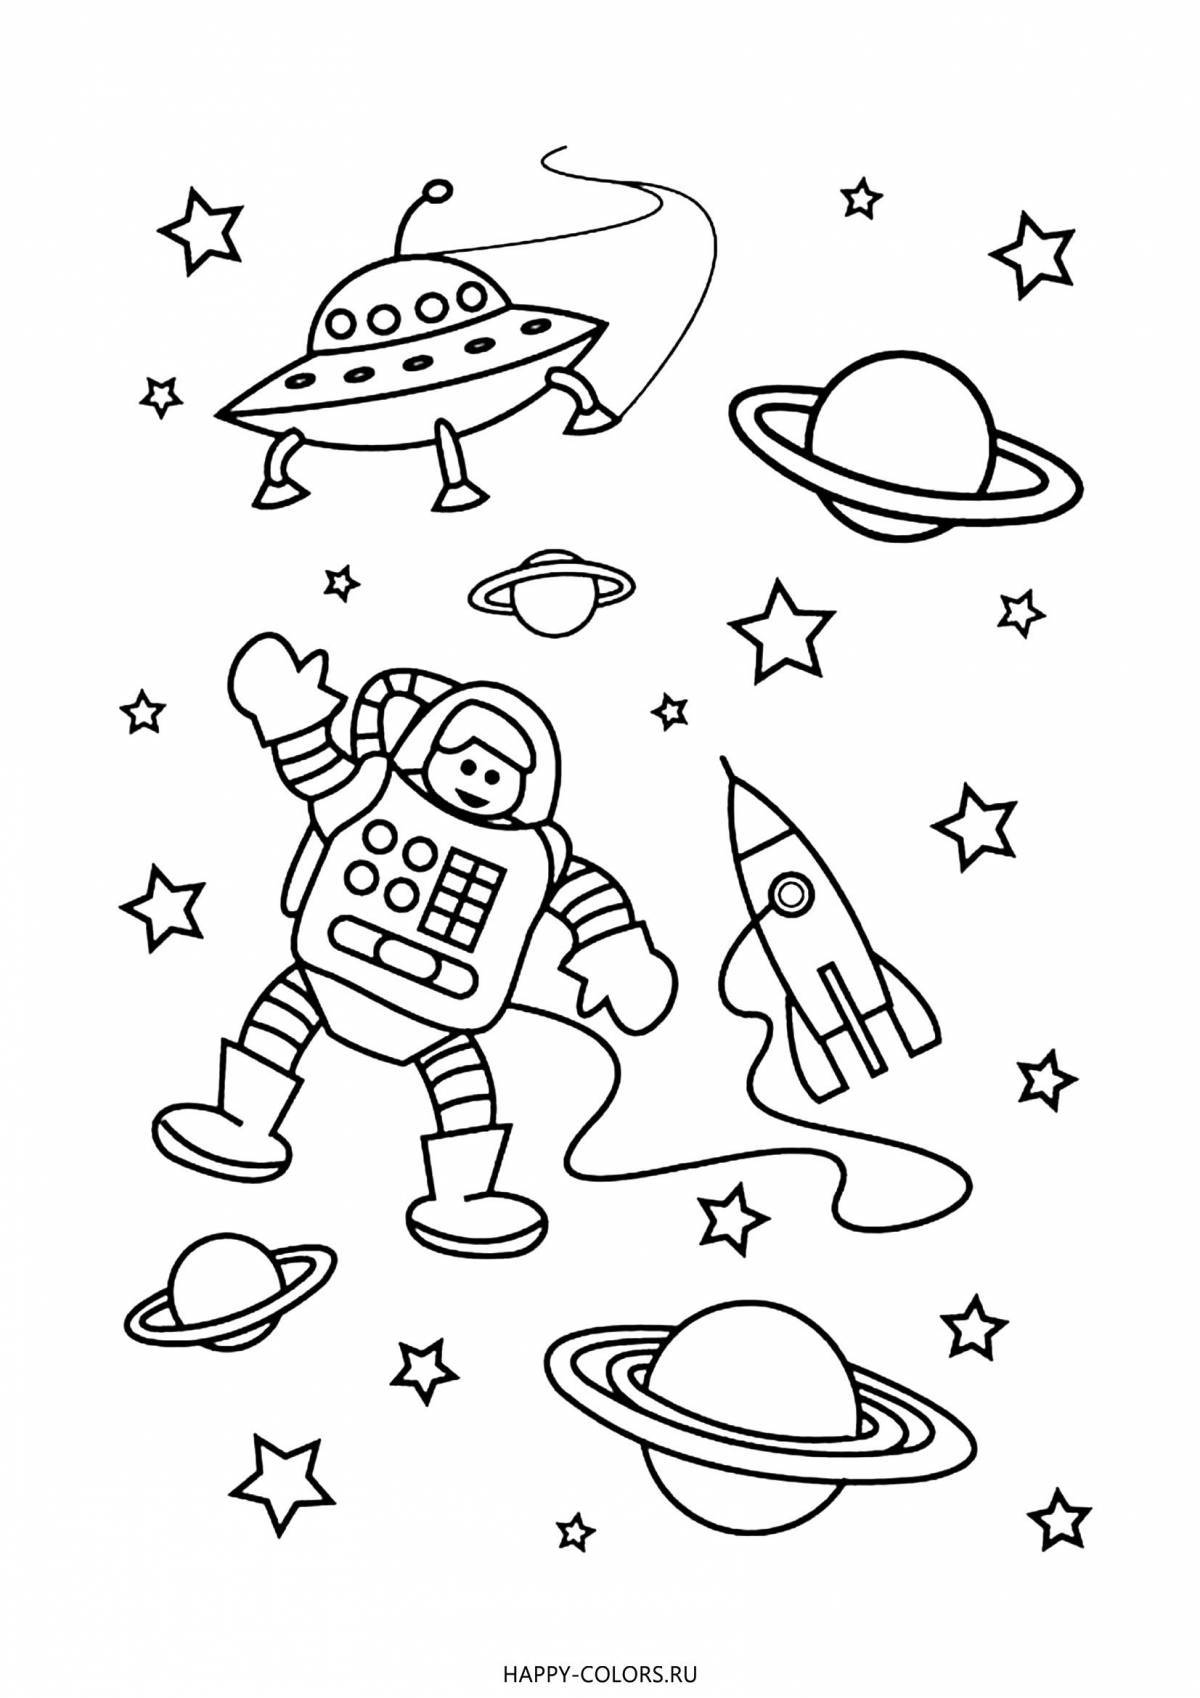 Intergalactic space coloring book for kids